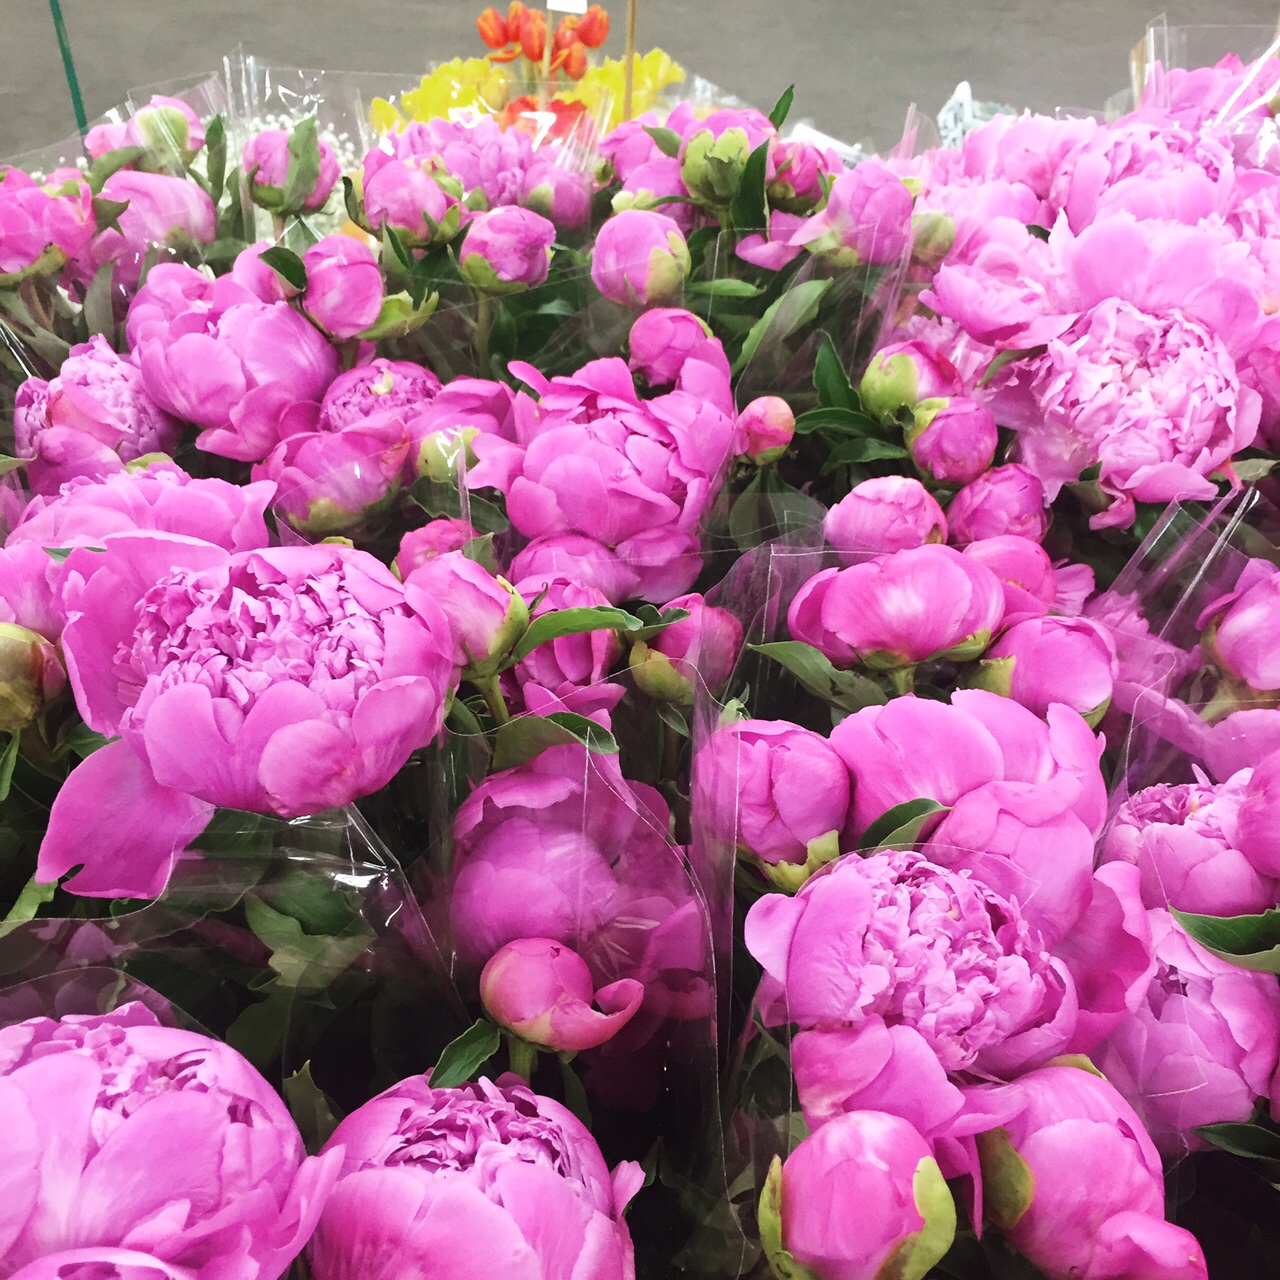 Hot pink peonies at the flower market 